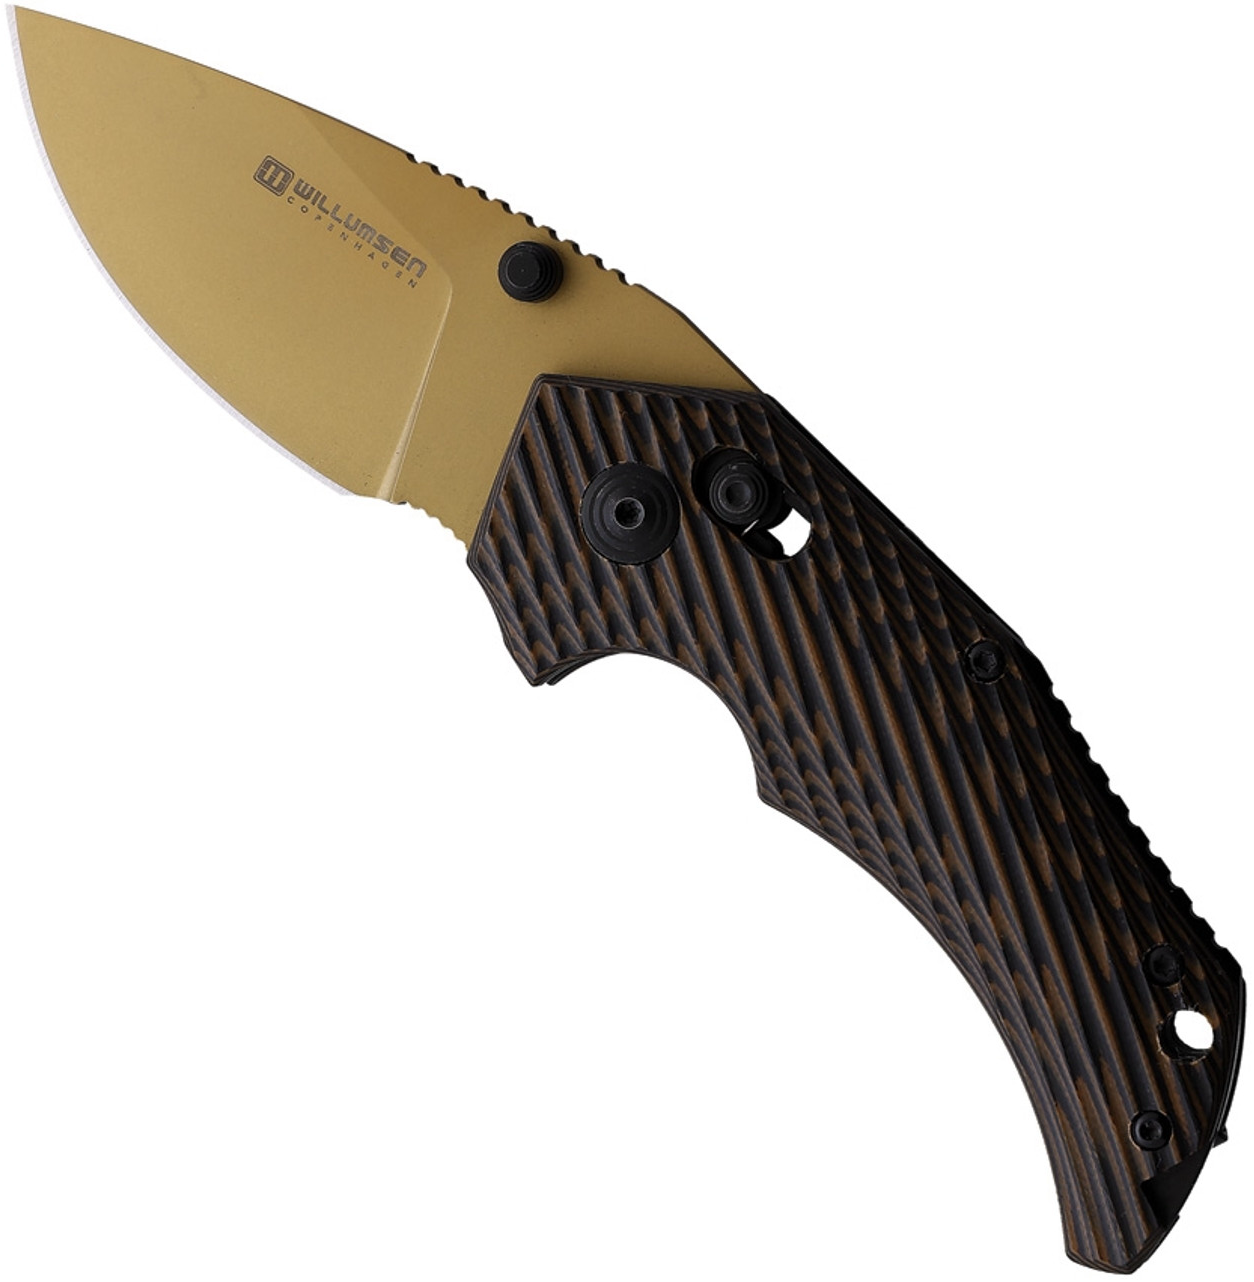 product image for Mikkel Willumsen Chibs 2-Tone Tan G-10 Handle 14C28N Steel Blade Folding Knife